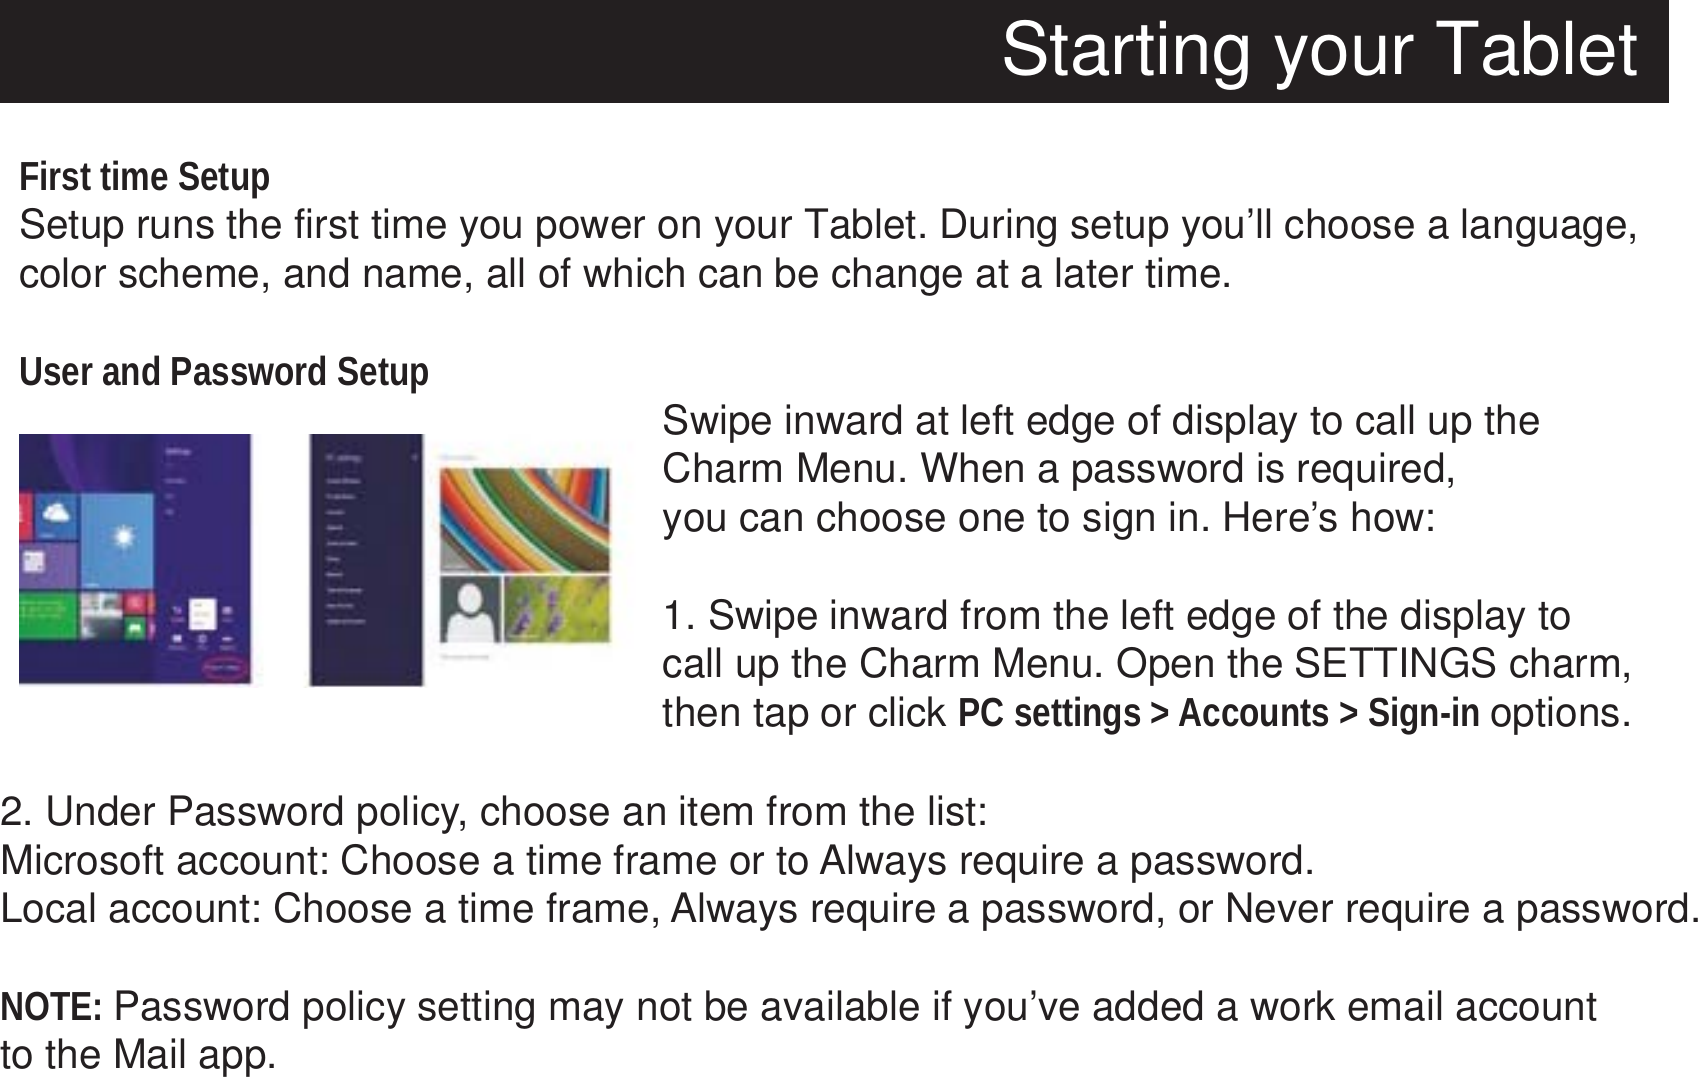 Starting your TabletFirst time SetupSetup runs the first time you power on your Tablet. During setup you’ll choose a language, color scheme, and name, all of which can be change at a later time.User and Password Setup Swipe inward at left edge of display to call up the Charm Menu. When a password is required, you can choose one to sign in. Here’s how:1. Swipe inward from the left edge of the display to call up the Charm Menu. Open the SETTINGS charm,then tap or click PC settings &gt; Accounts &gt; Sign-in options.2. Under Password policy, choose an item from the list:Microsoft account: Choose a time frame or to Always require a password.Local account: Choose a time frame, Always require a password, or Never require a password.NOTE: Password policy setting may not be available if you’ve added a work email account to the Mail app.